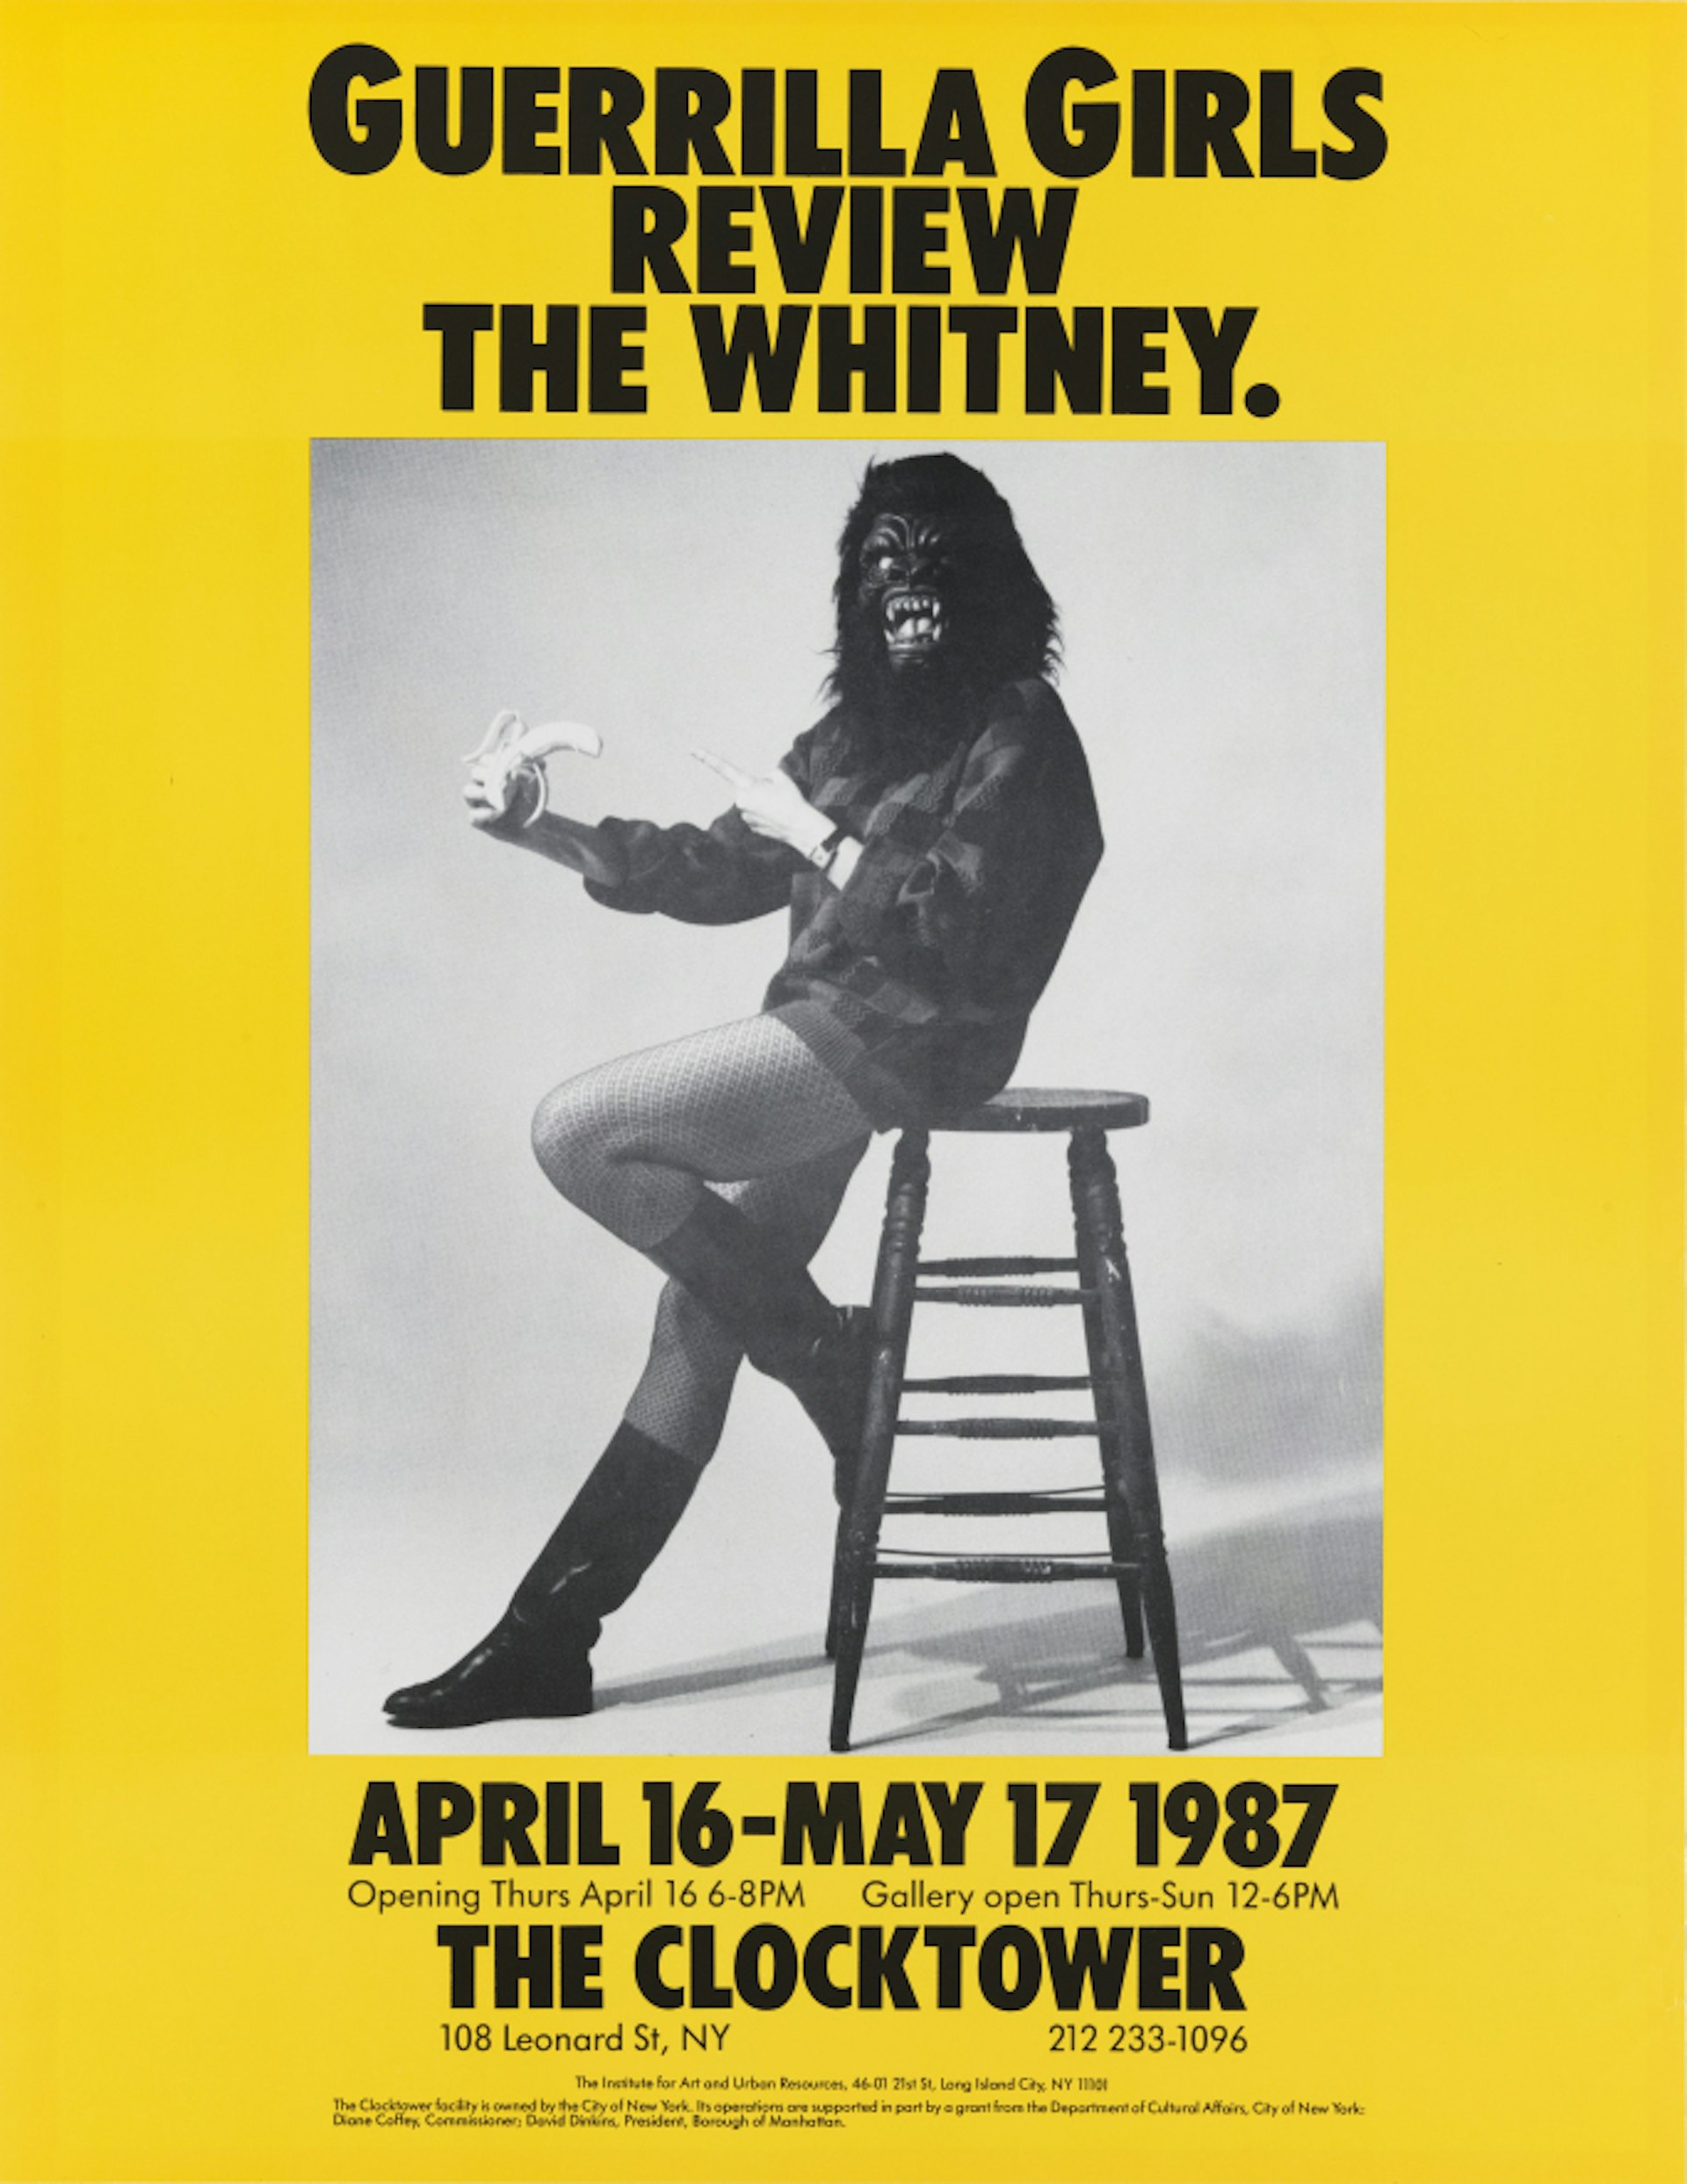 Guerrilla Girls Review the Whitney, 1987, Guerrilla Girls. Courtesy the Whitney.